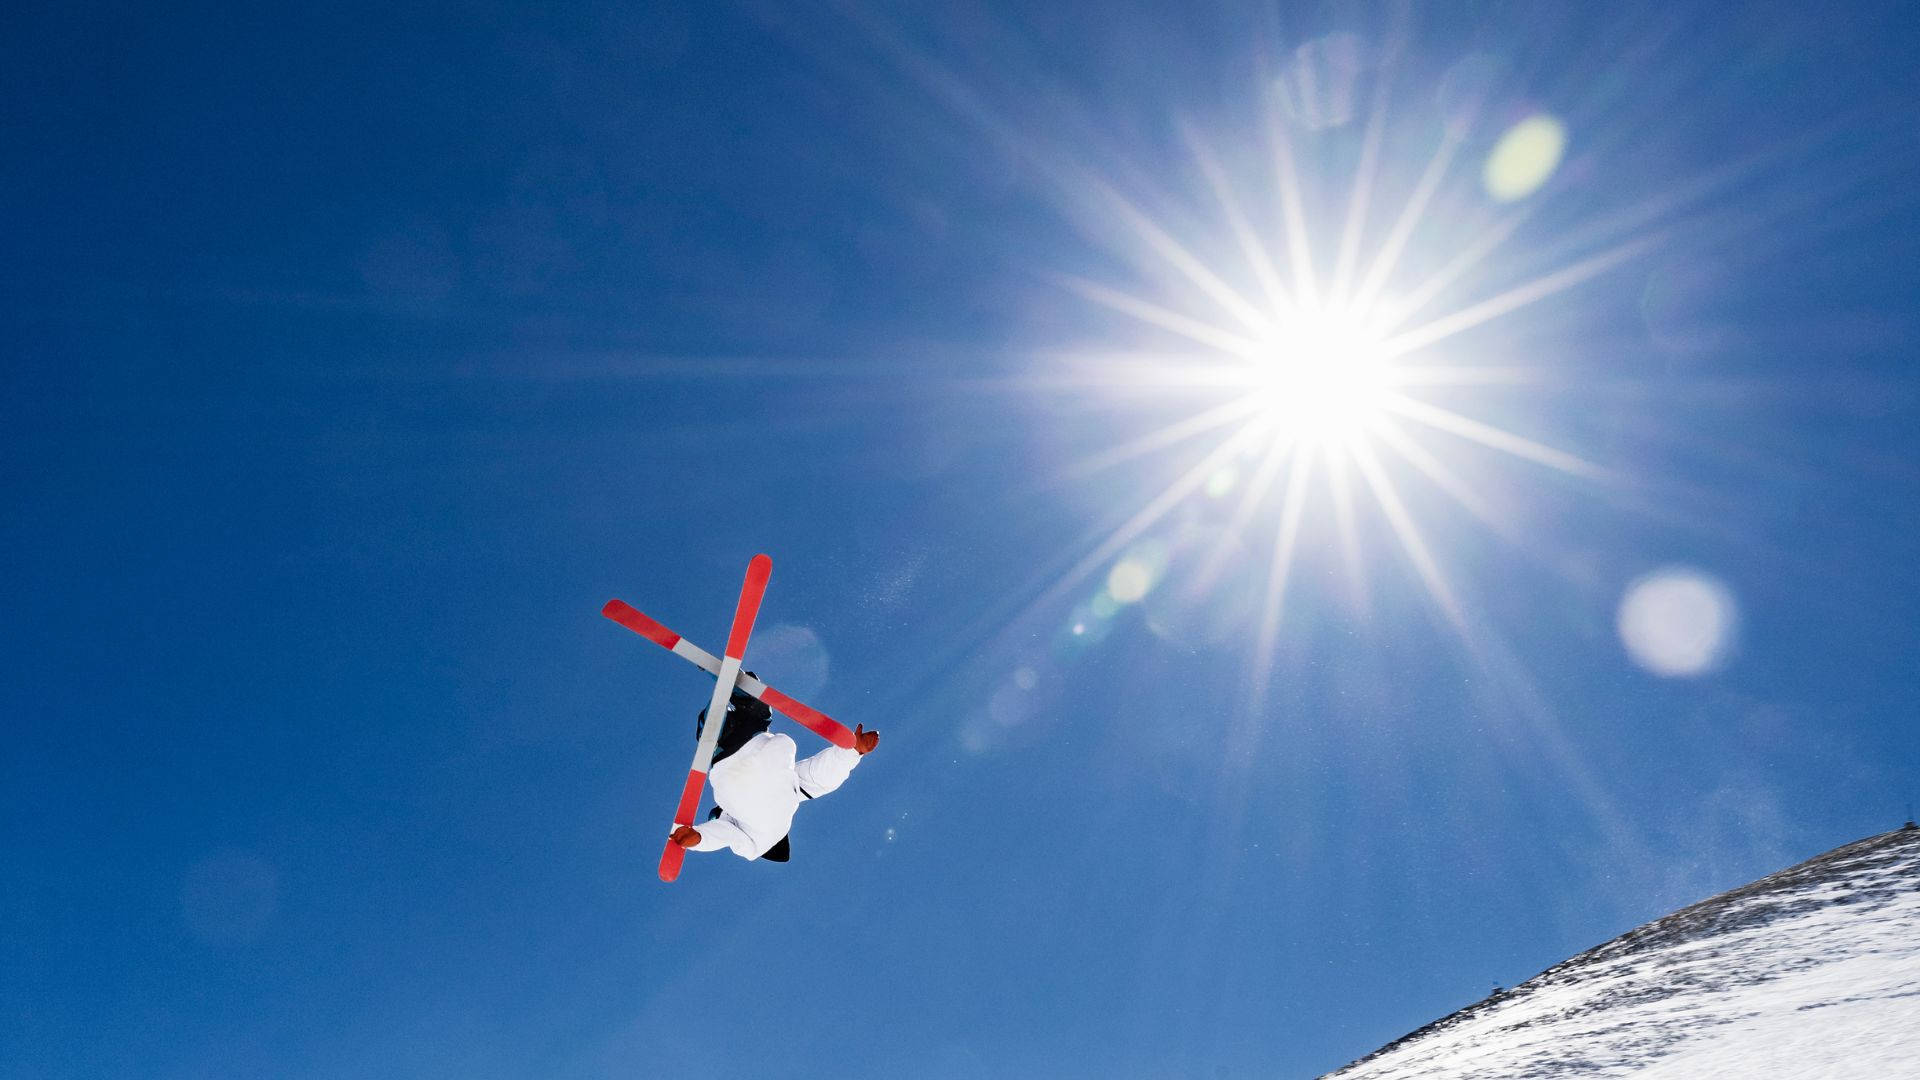 A Thrilling Mid-air Ski Jumping Moment